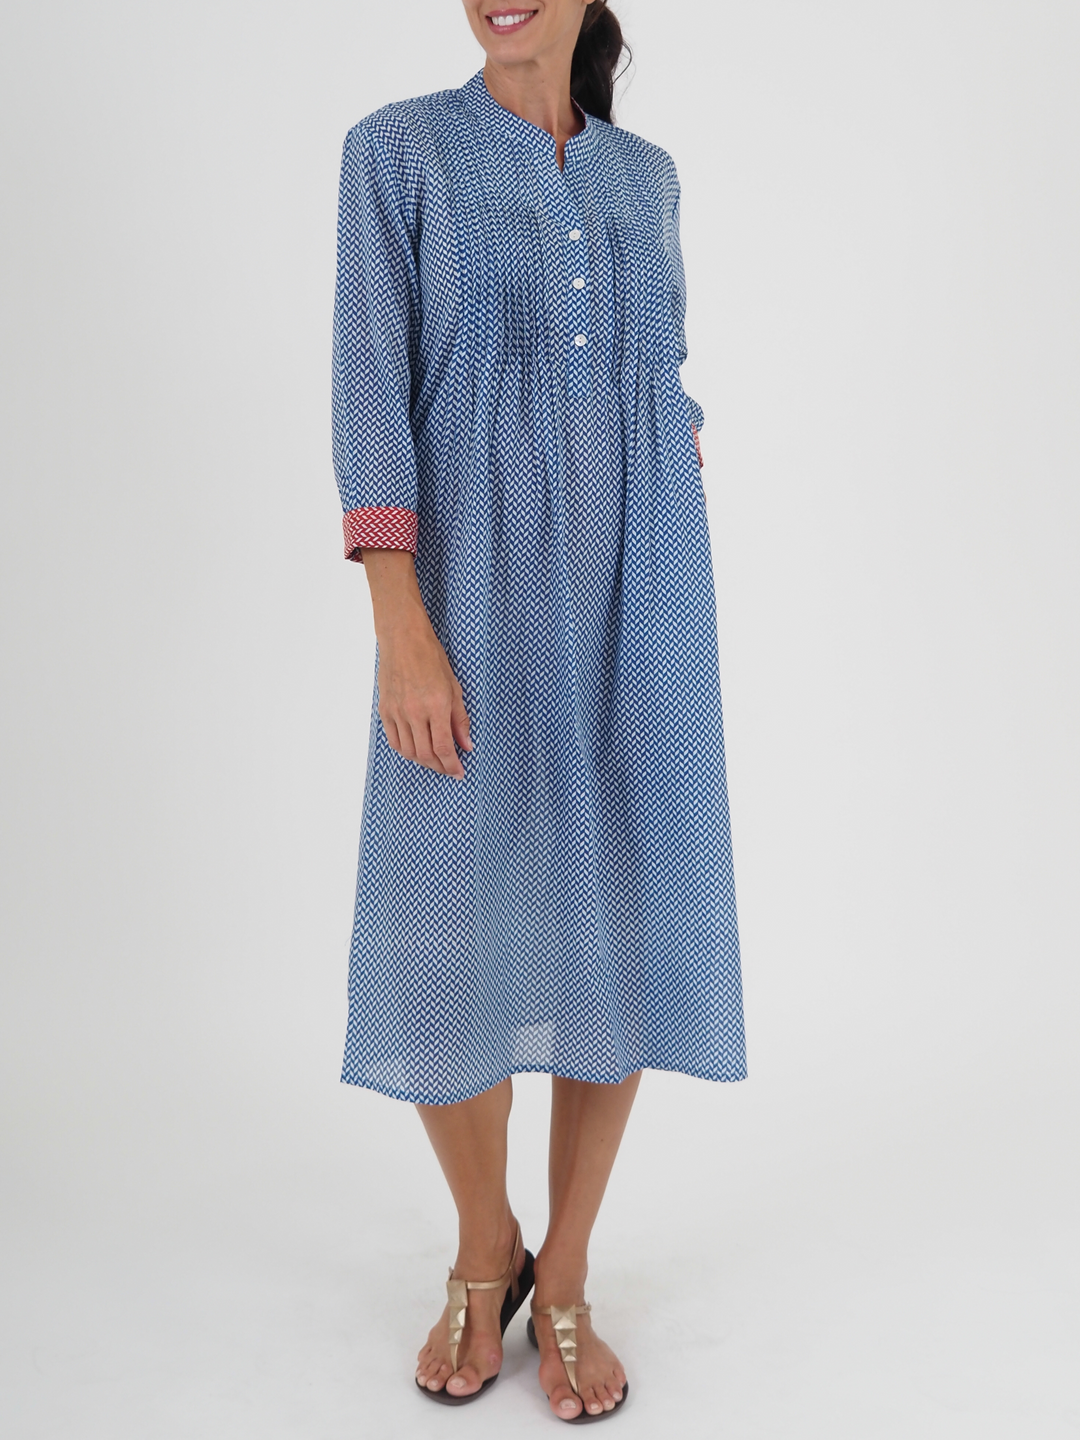 Cora Dress in Printed Cotton